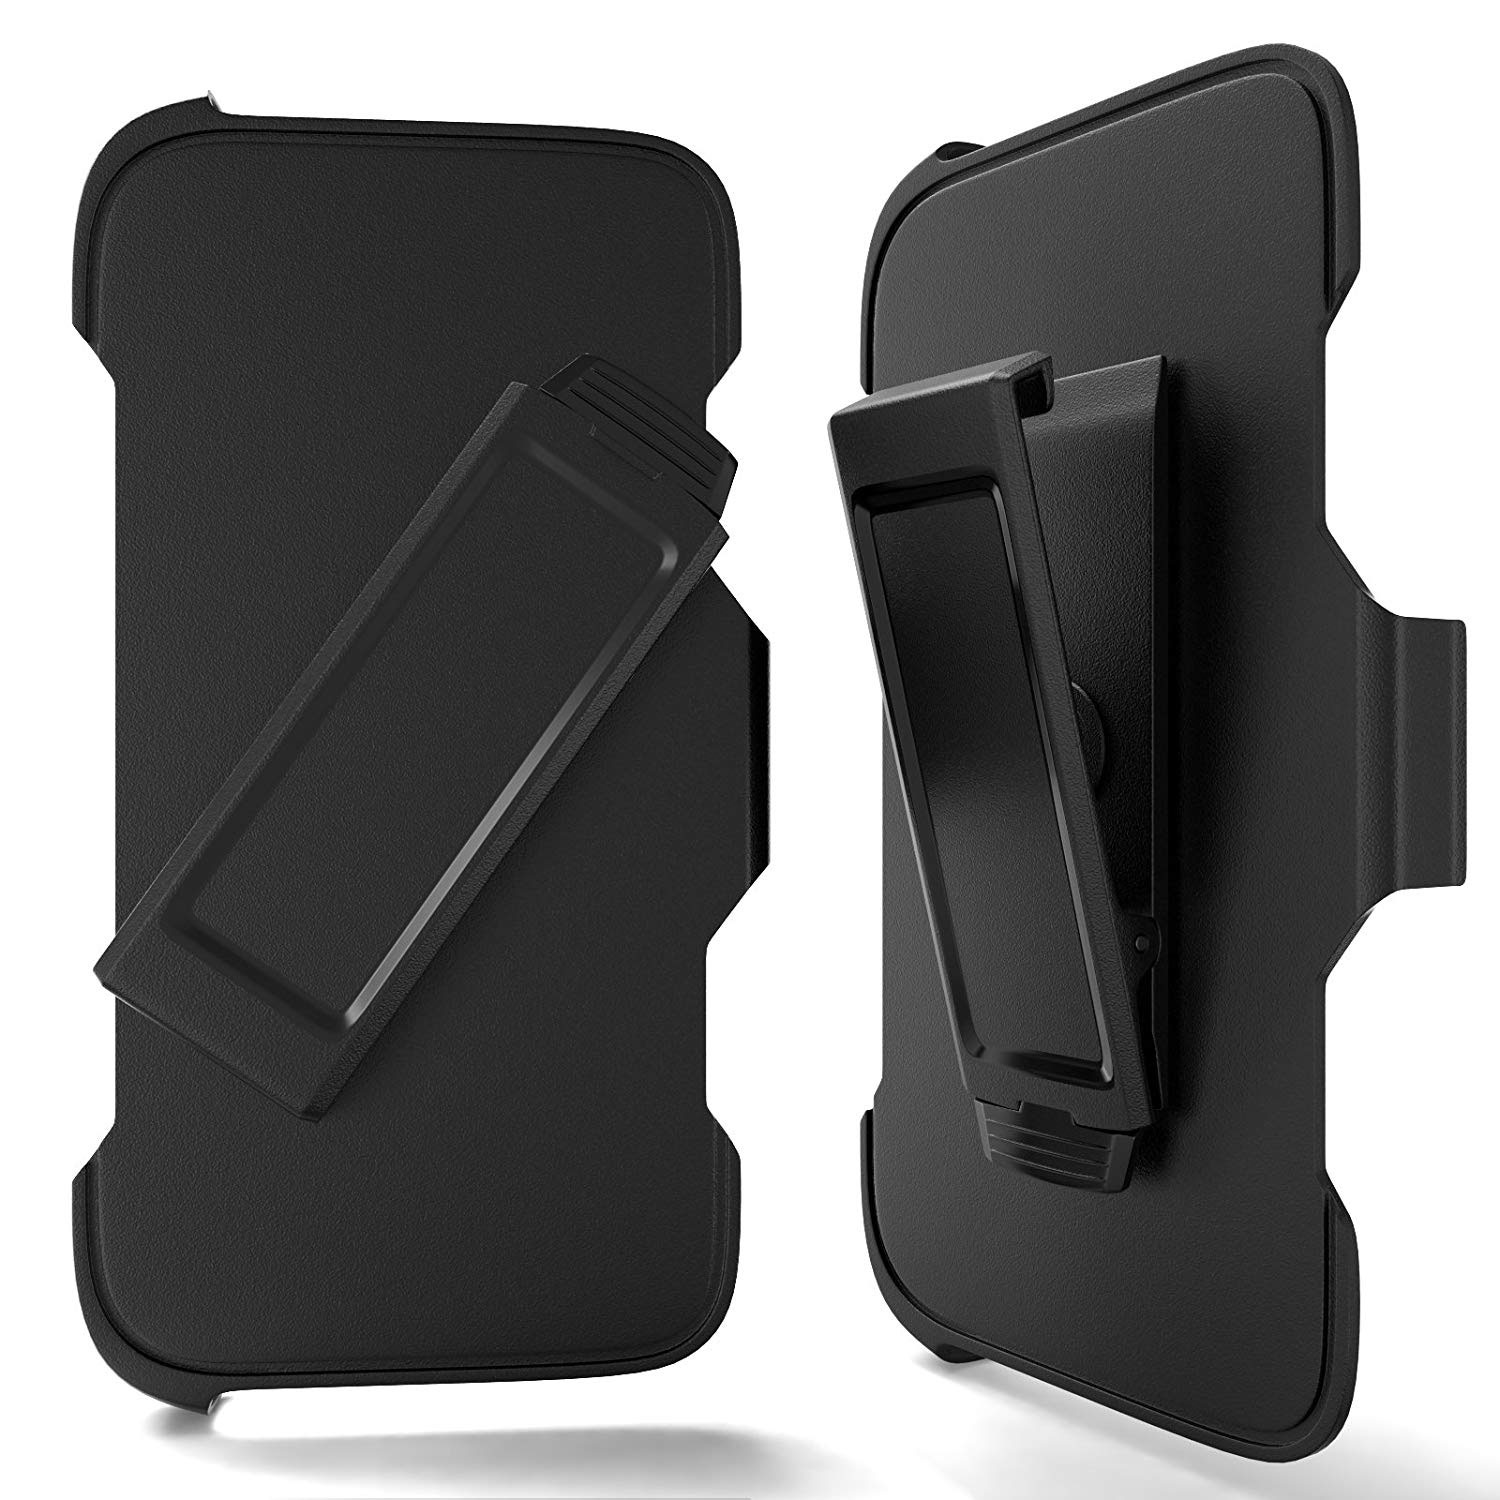 Armor Robot Case Clip Only for iPHONE 12 Mini 5.4 (Black)